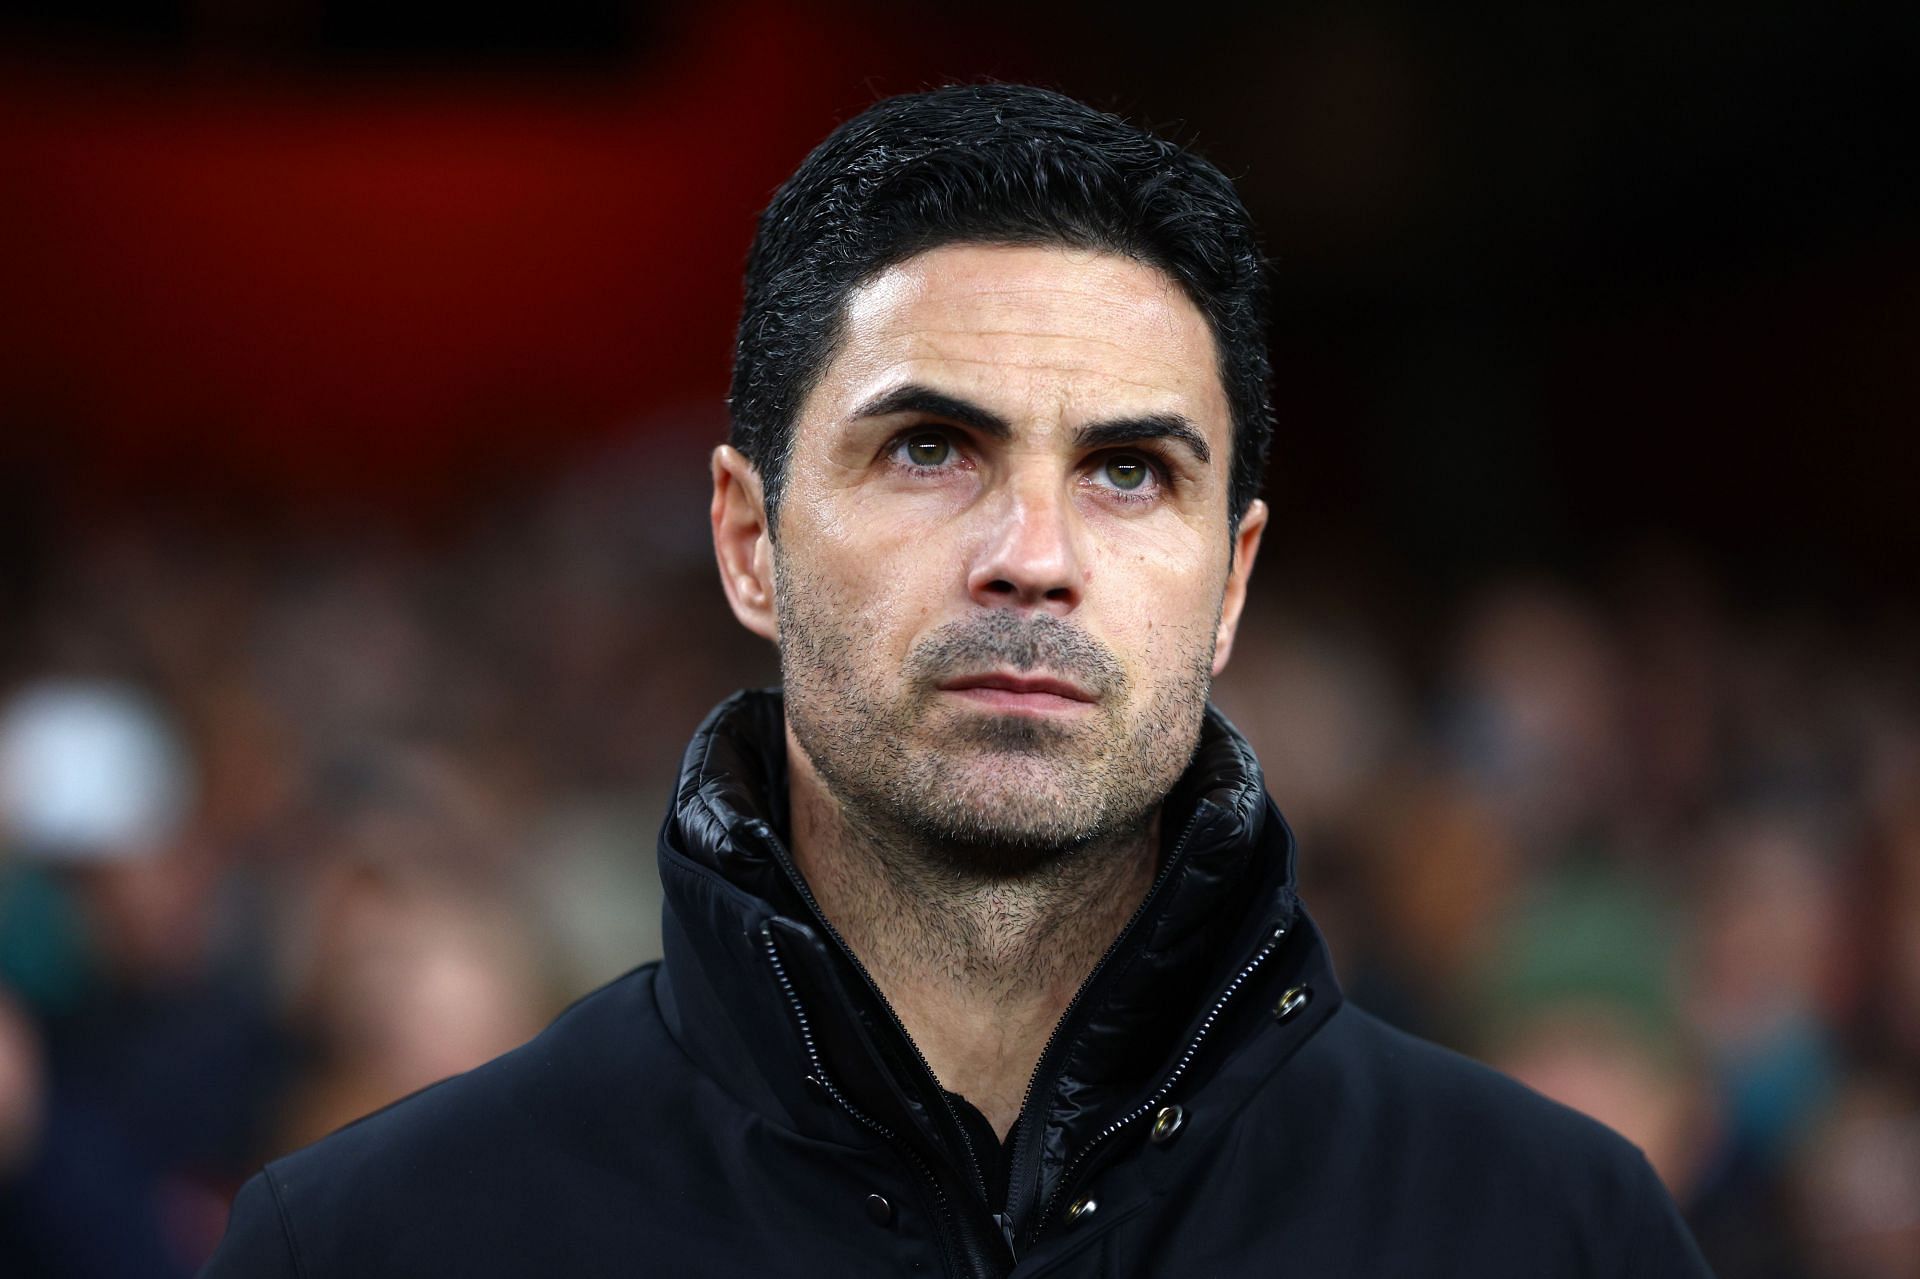 Mikel Arteta talked up another title challenge.